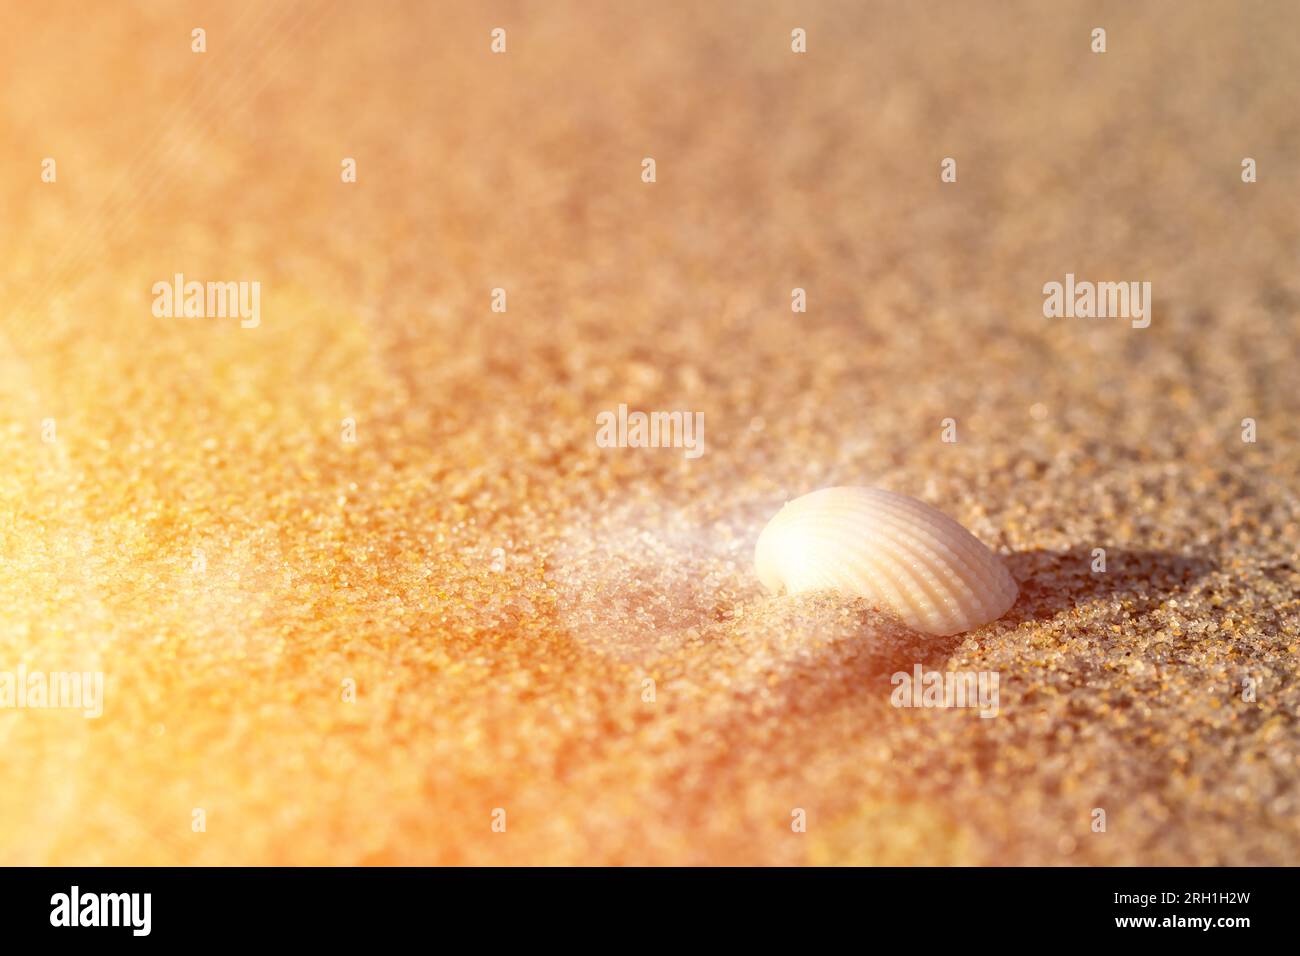 Shell in the sand. View of the sandy beach and the rays of the setting sun. Stock Photo